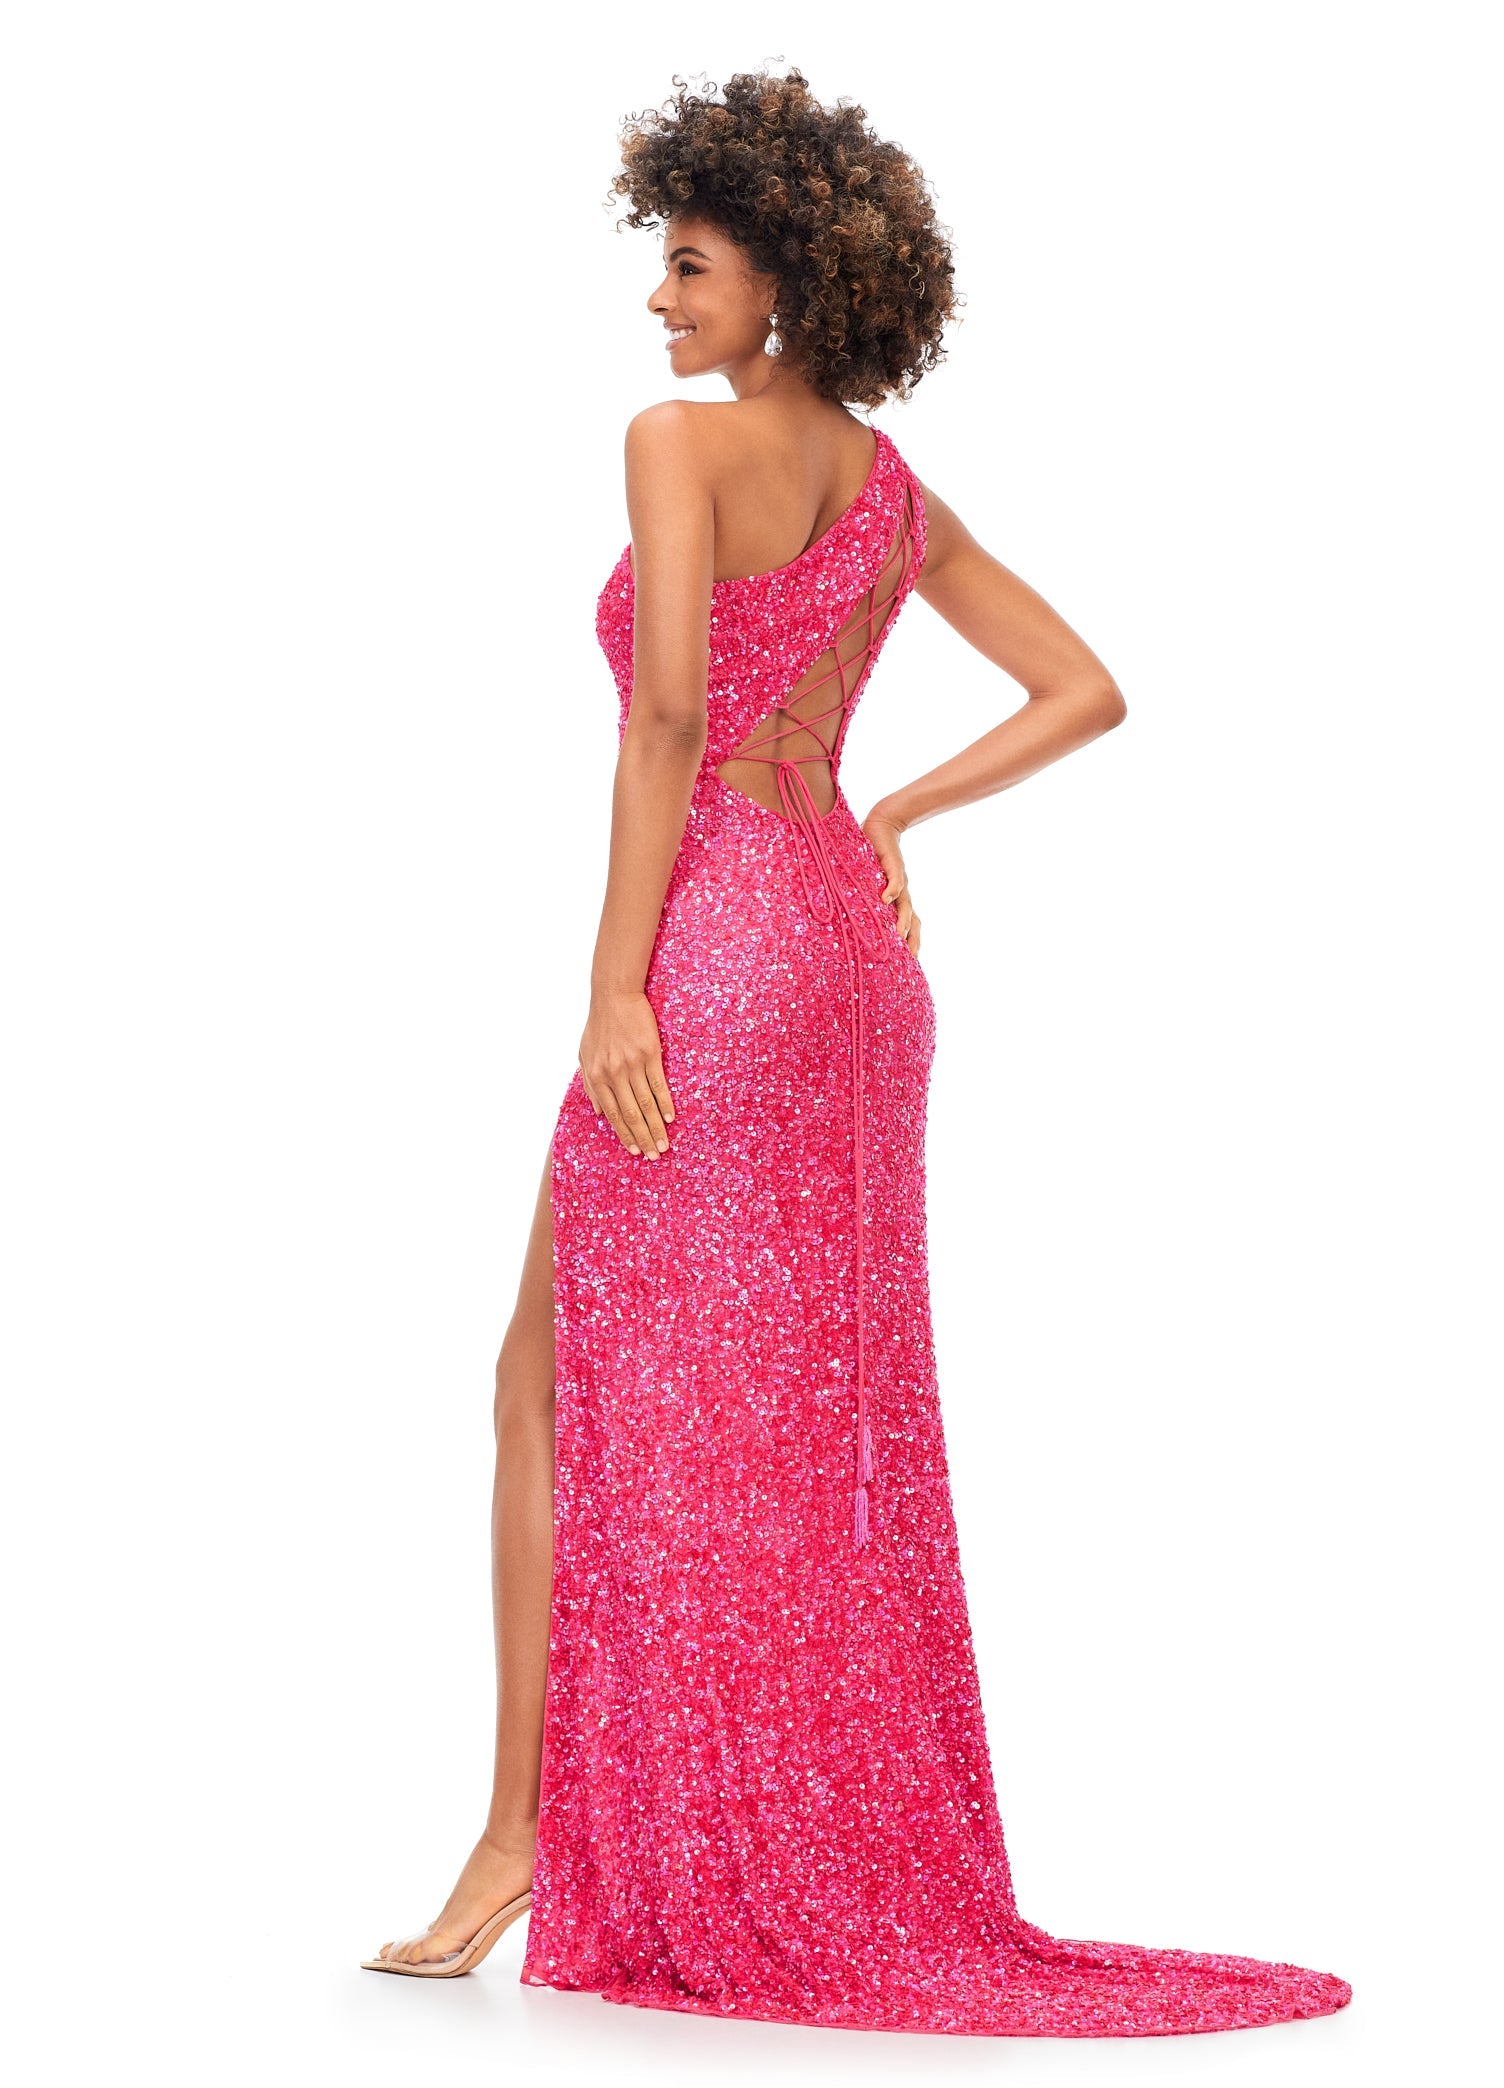 Ashley Lauren 11144 Sequin One Shoulder Prom Dress with Lace up Back  Dazzle the night away in this one shoulder sequin gown featuring an asymmetrical lace up back and left leg slit.